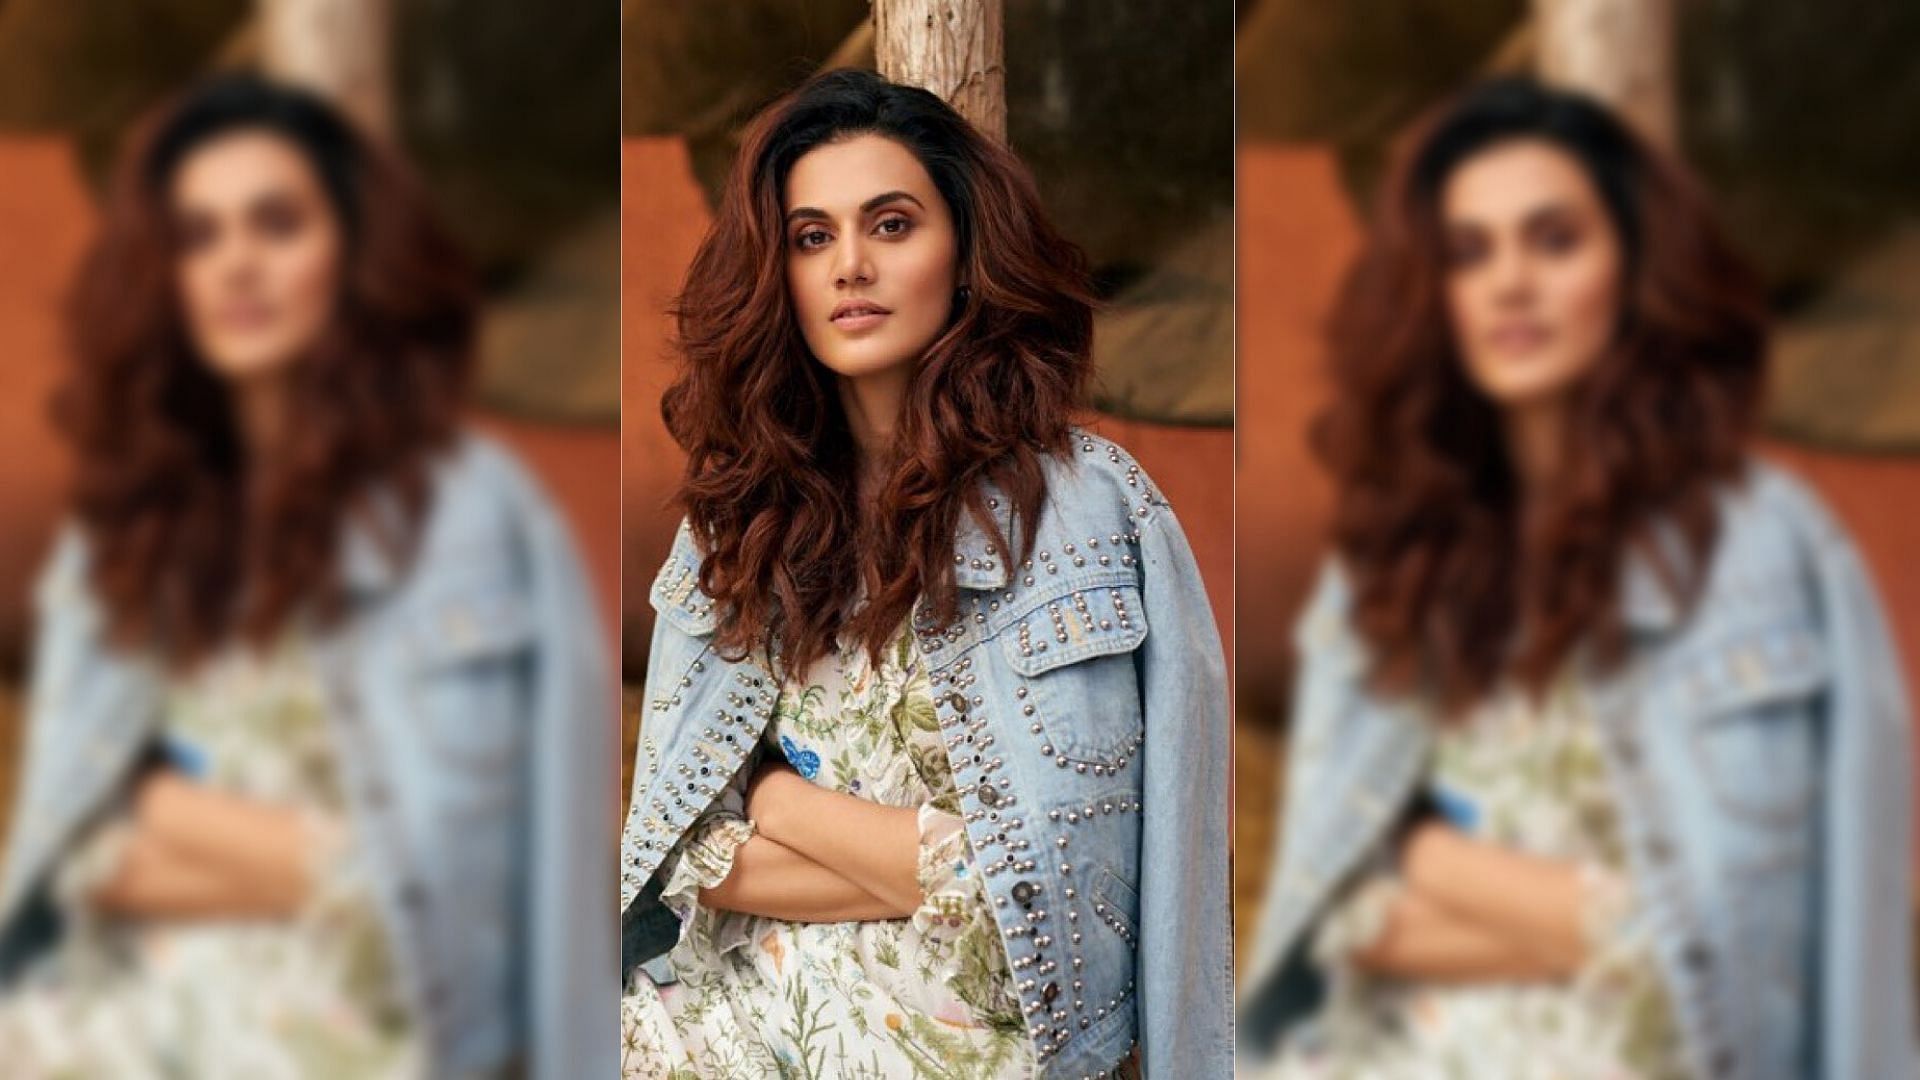 Taapsee Pannu speaks about her character in Thappad.